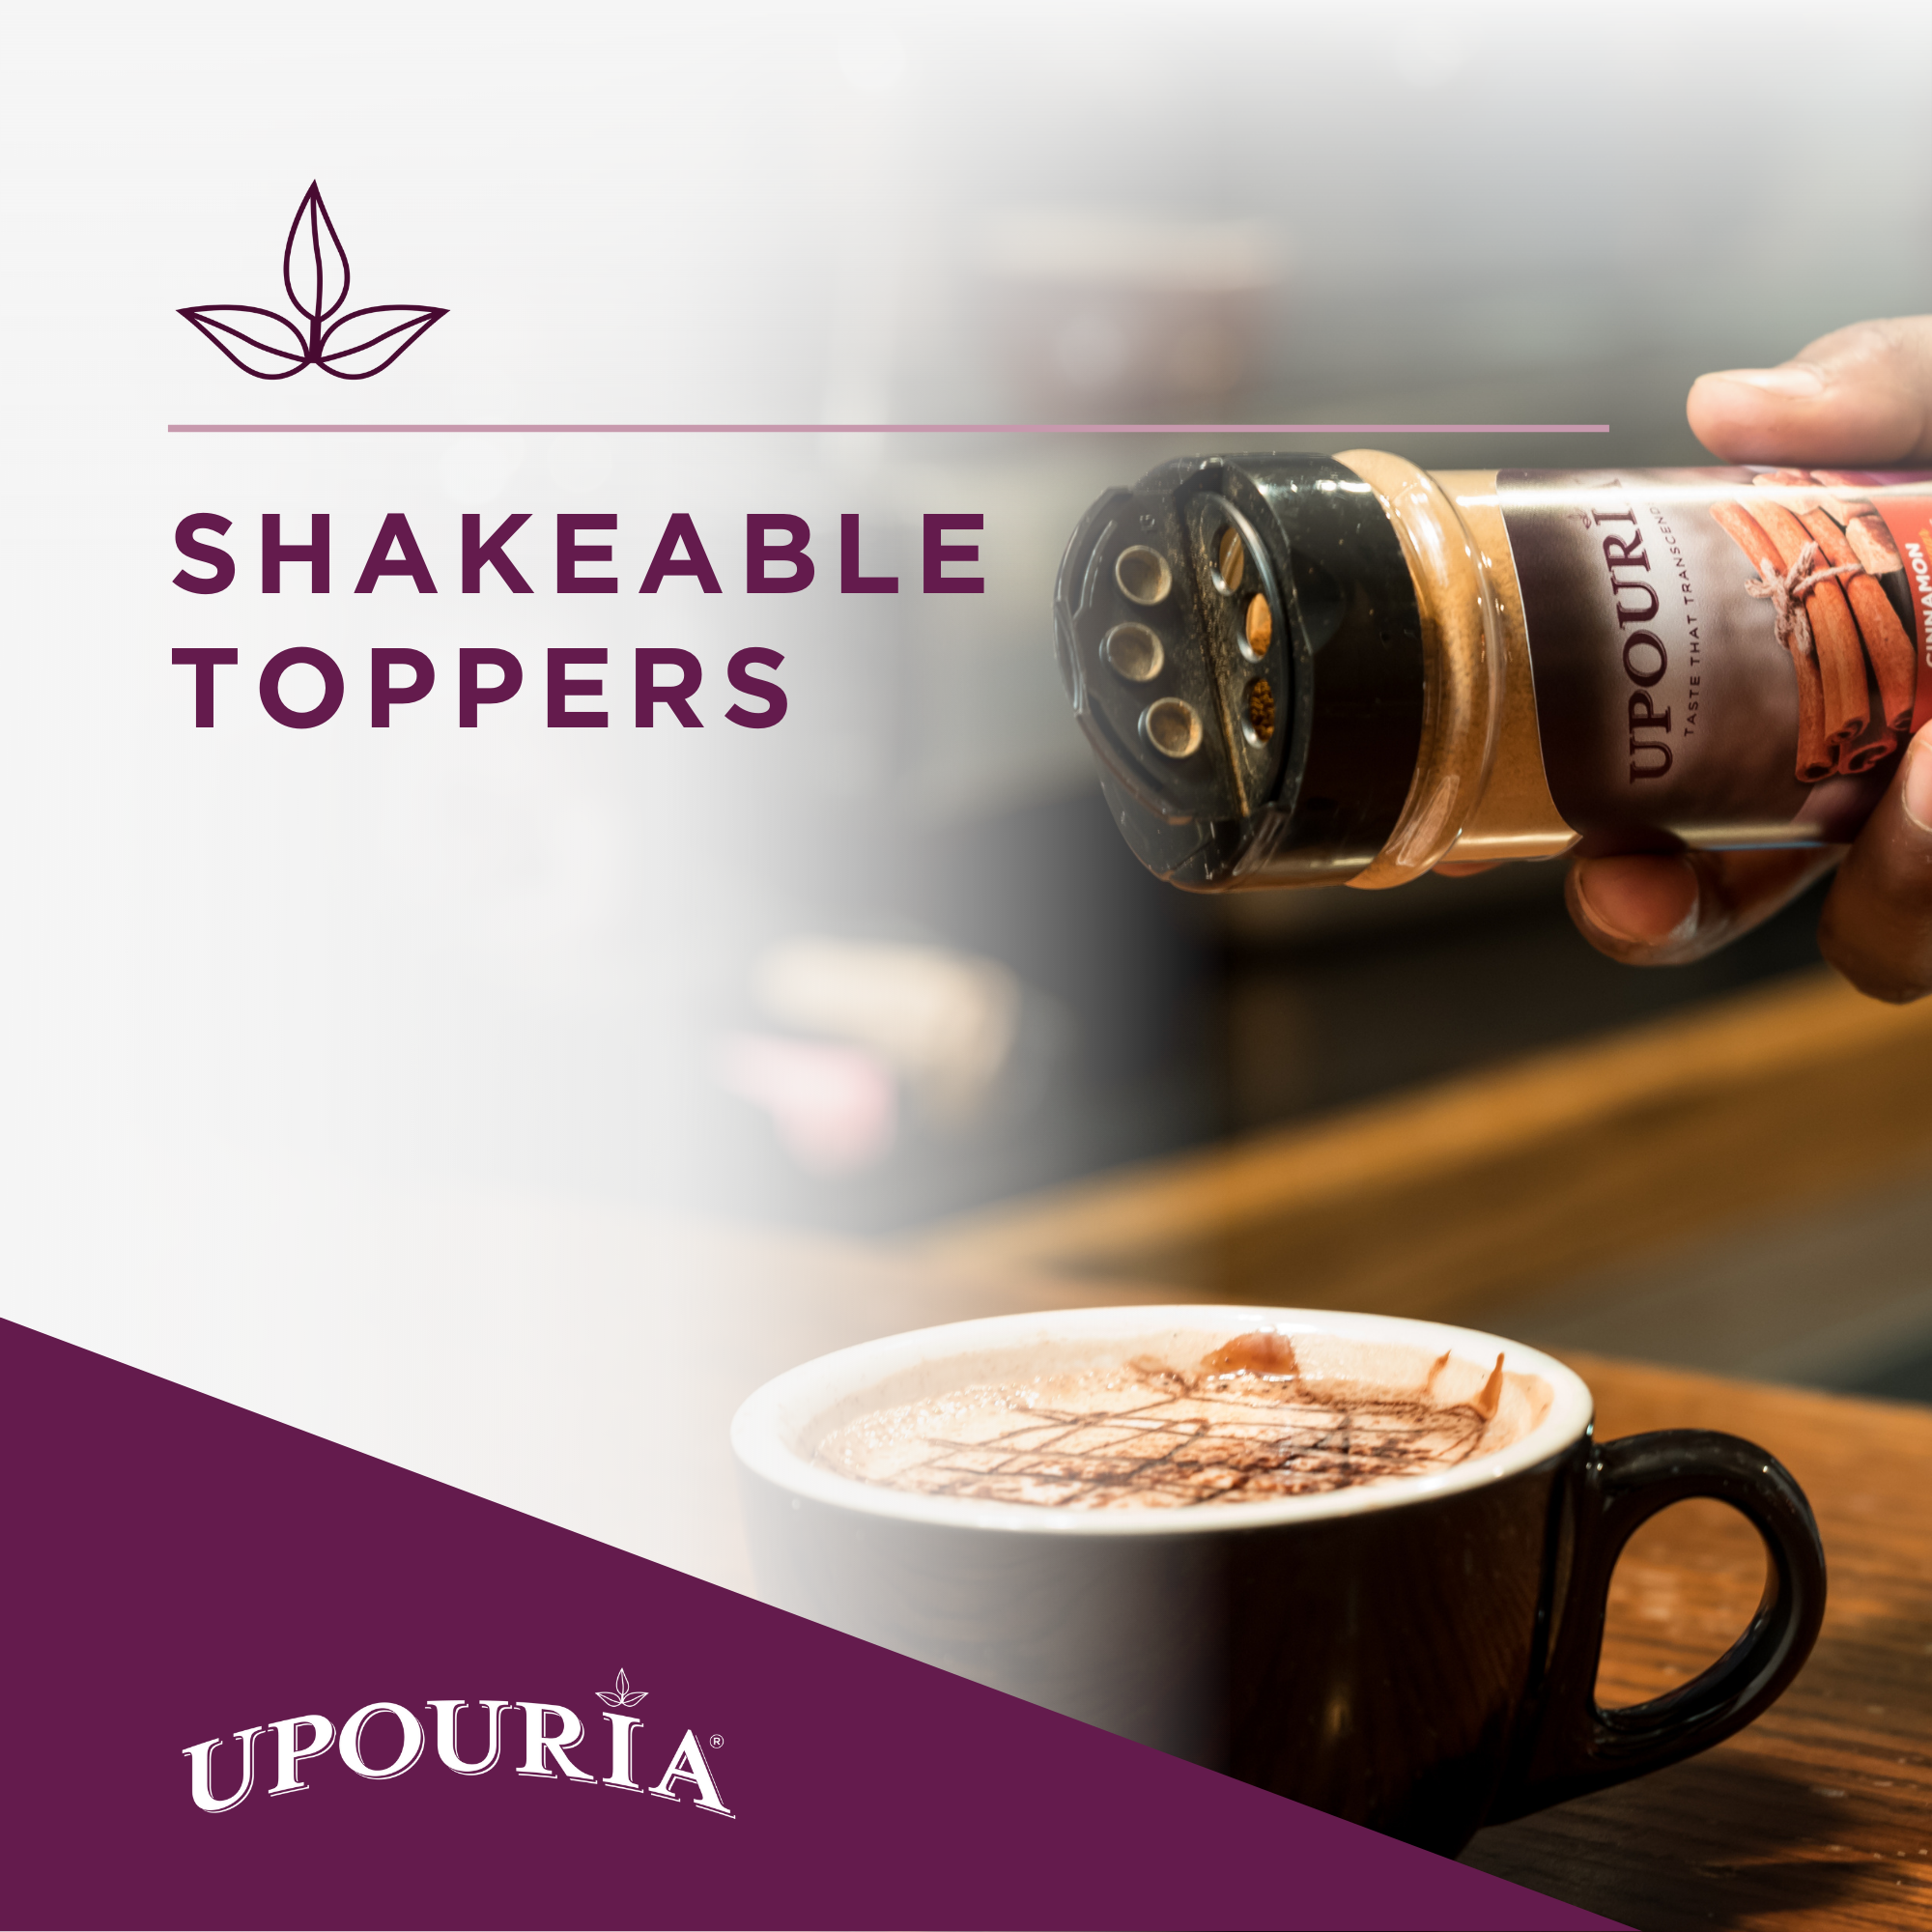 Upouria SHakeable Toppers Featured Image 2022